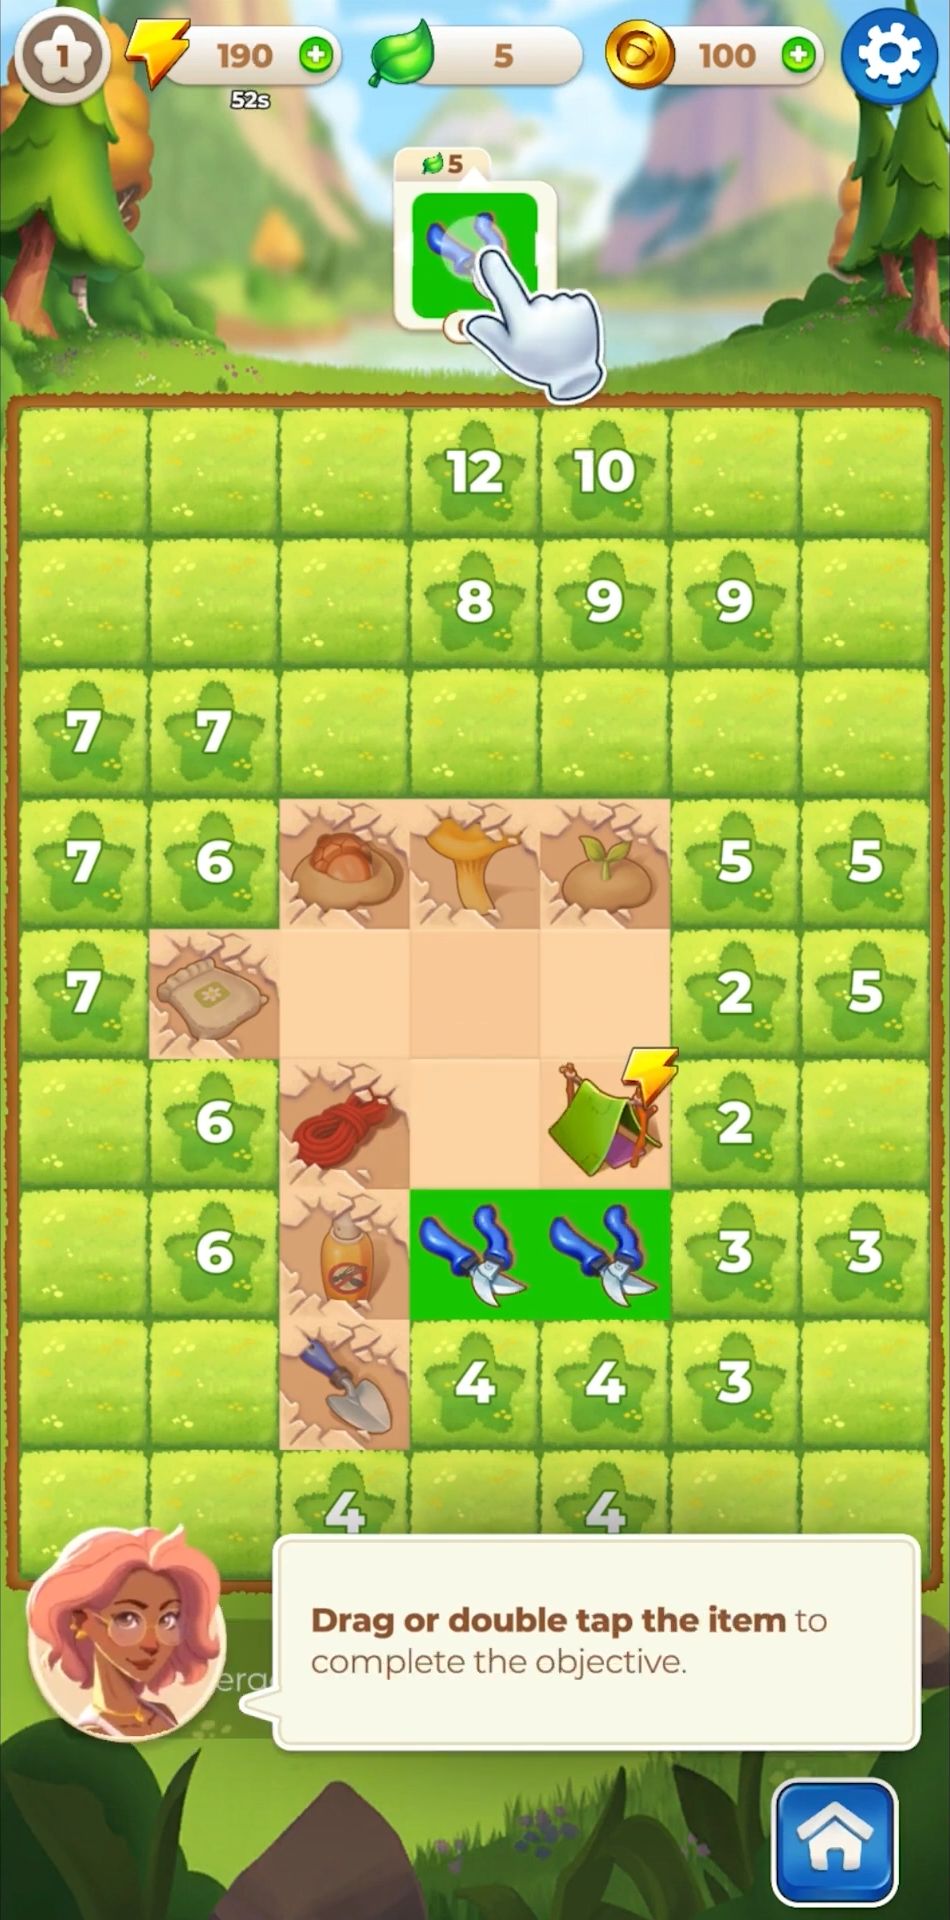 Full version of Android Puzzle game apk Longleaf Valley for tablet and phone.